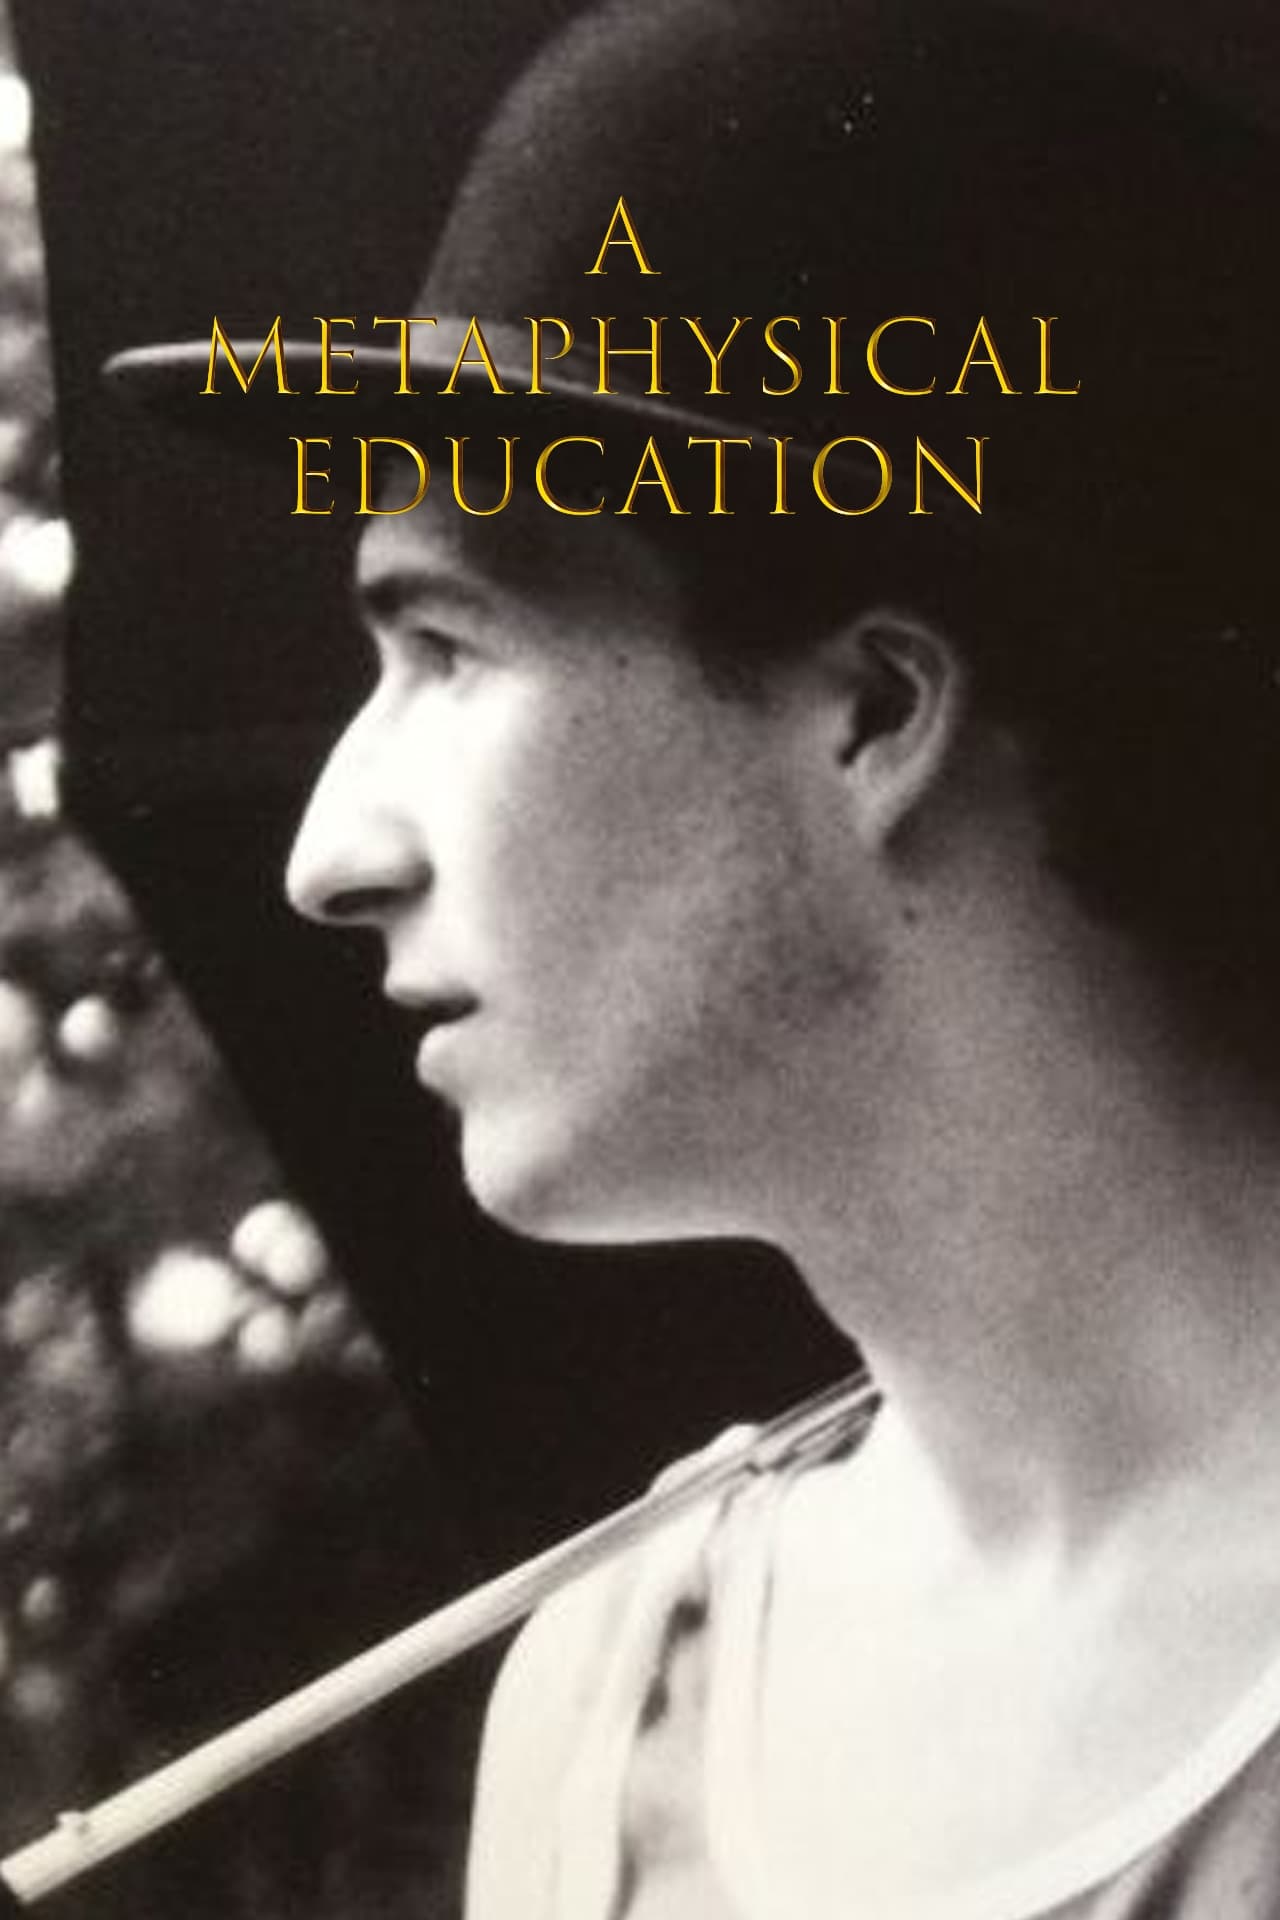 A Metaphysical Education